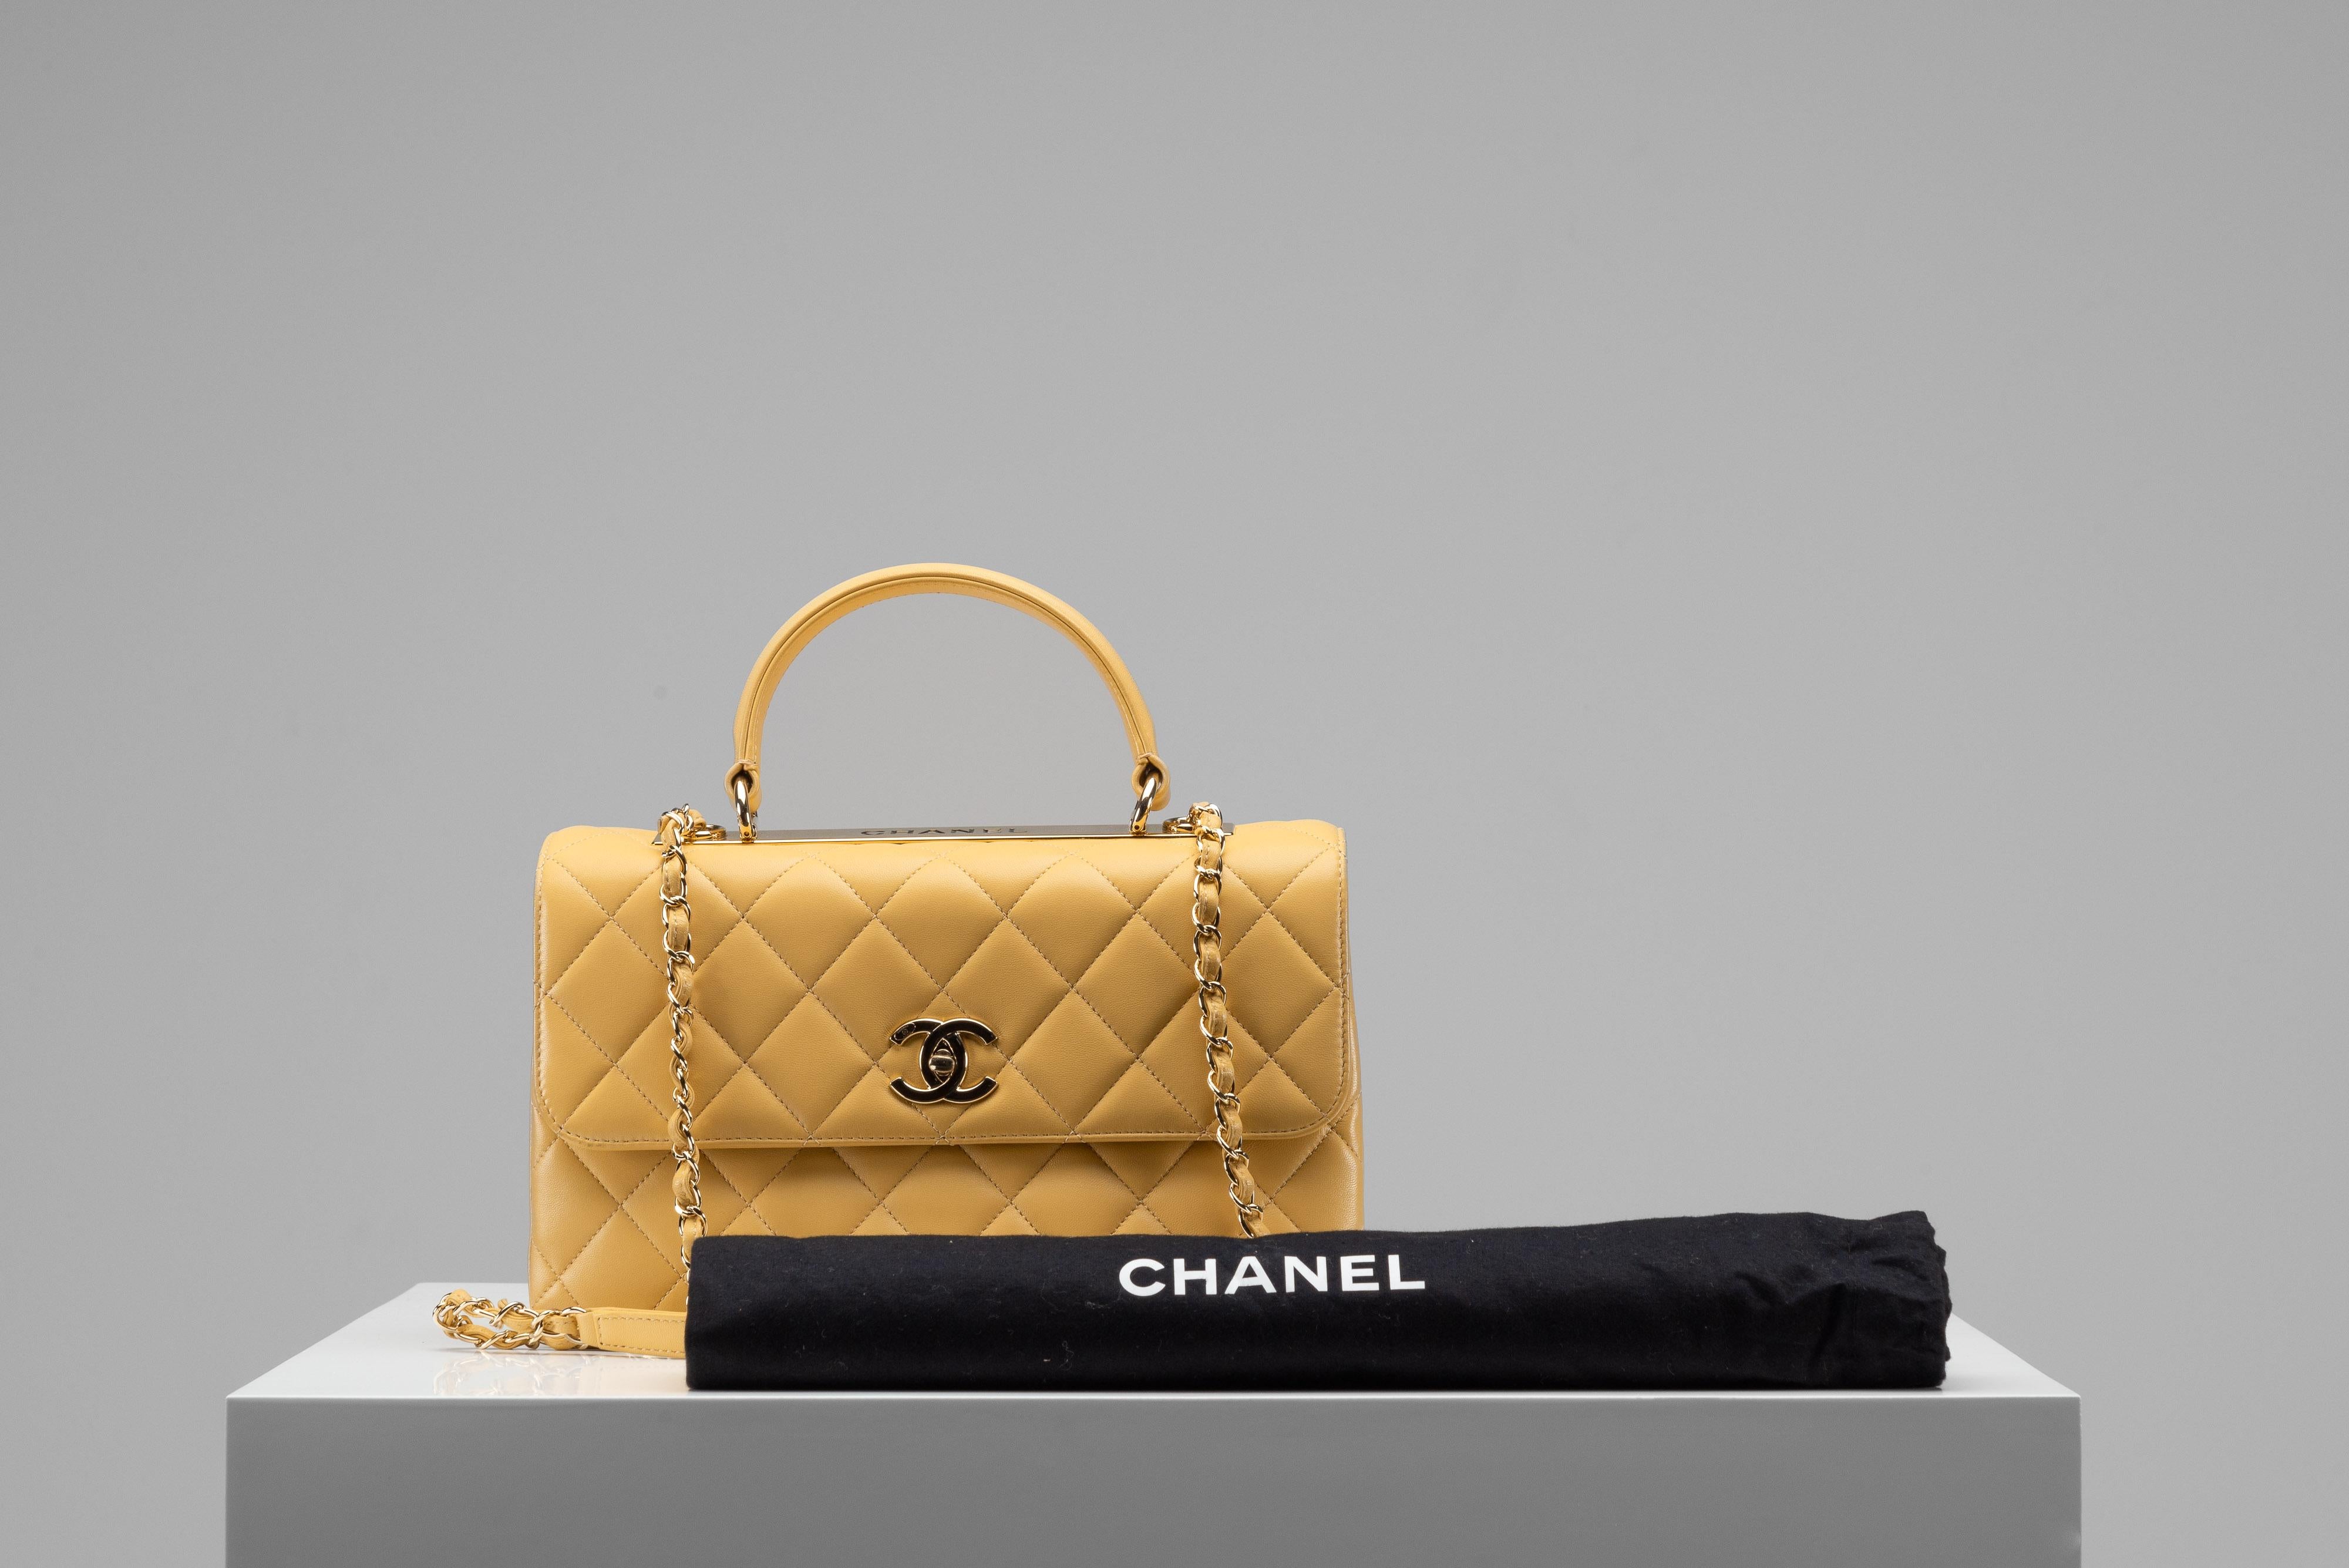 From the collection of SAVINETI we offer this Chanel Trendy CC Bag:
- Brand: Chanel
- Model: Trendy CC Medium
- Color: Yellow
- Year: 2017
- Condition: Very Good Condition
- Materials: Lambskin, Gold-Color Hardware
- Extras: Hologram, Authenticity